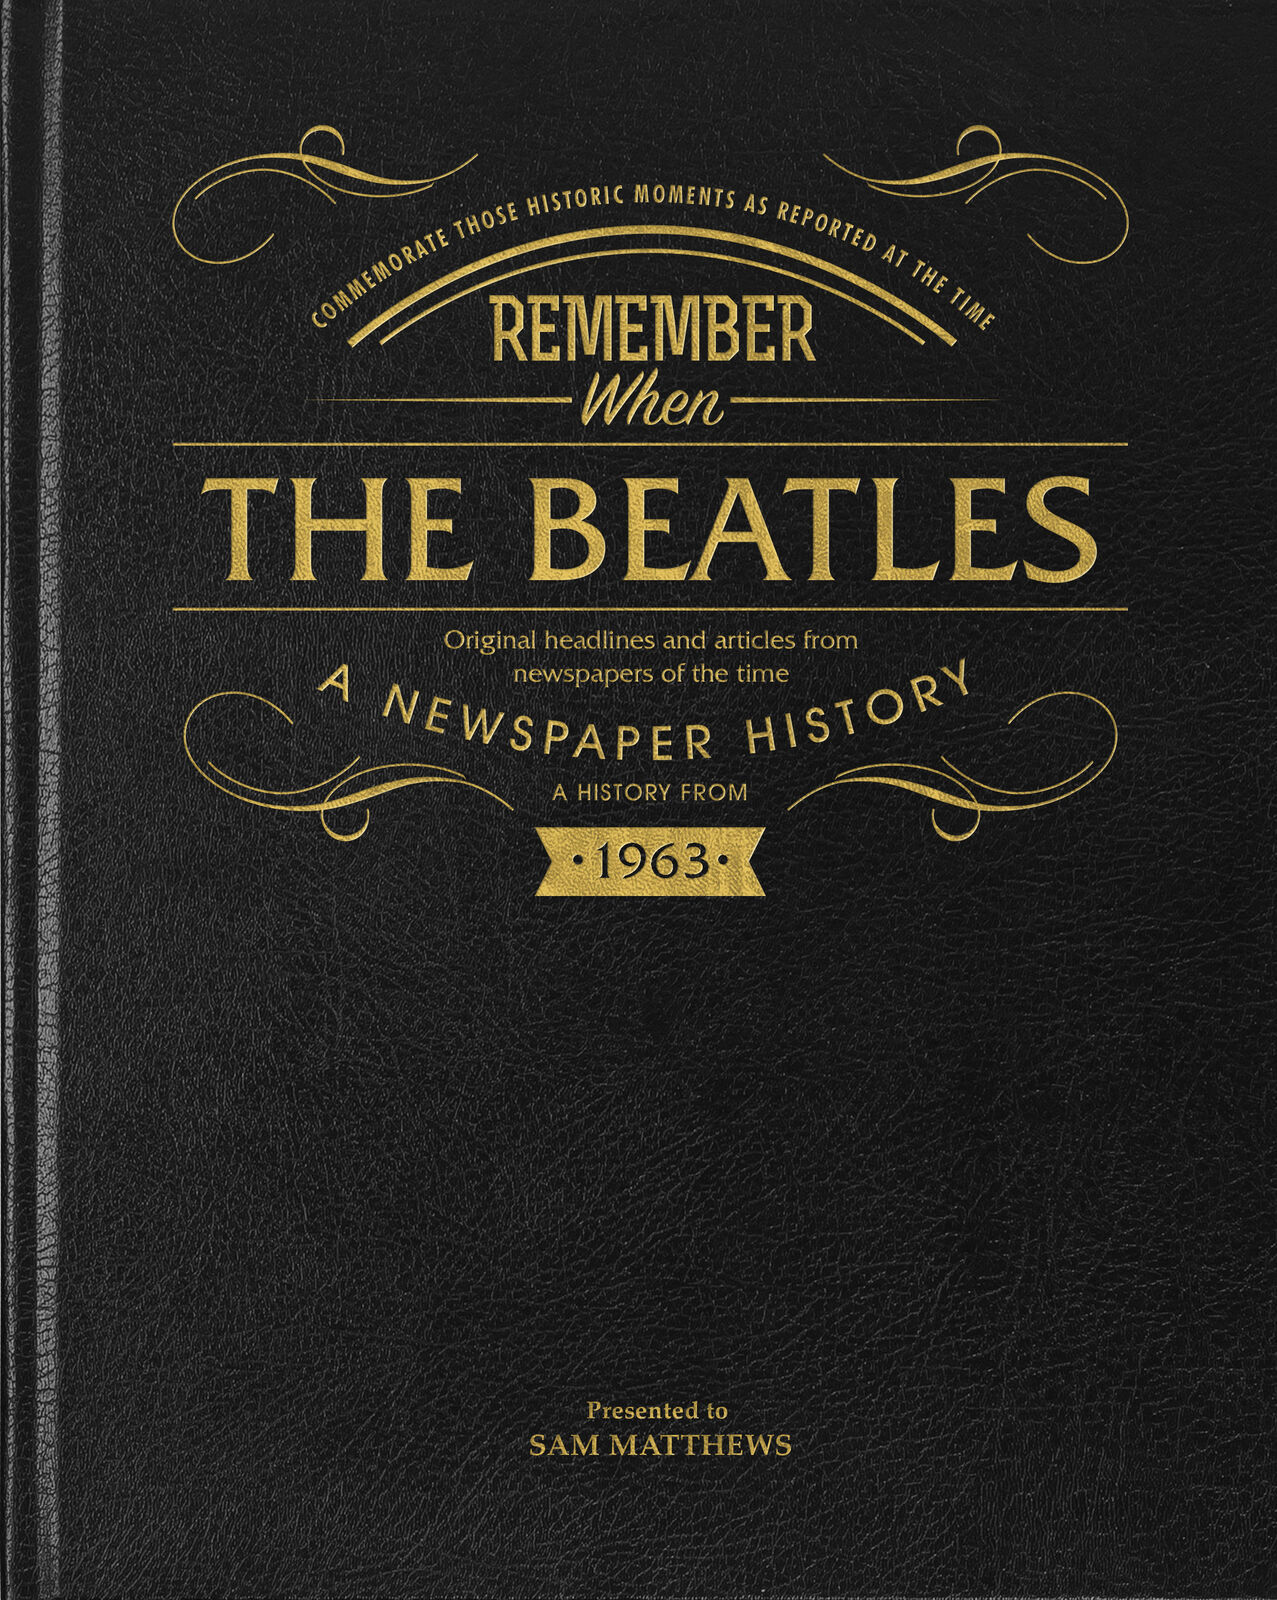 THE BEATLES History of Music Personalised Newspaper Birthday Gift Book LEATHER